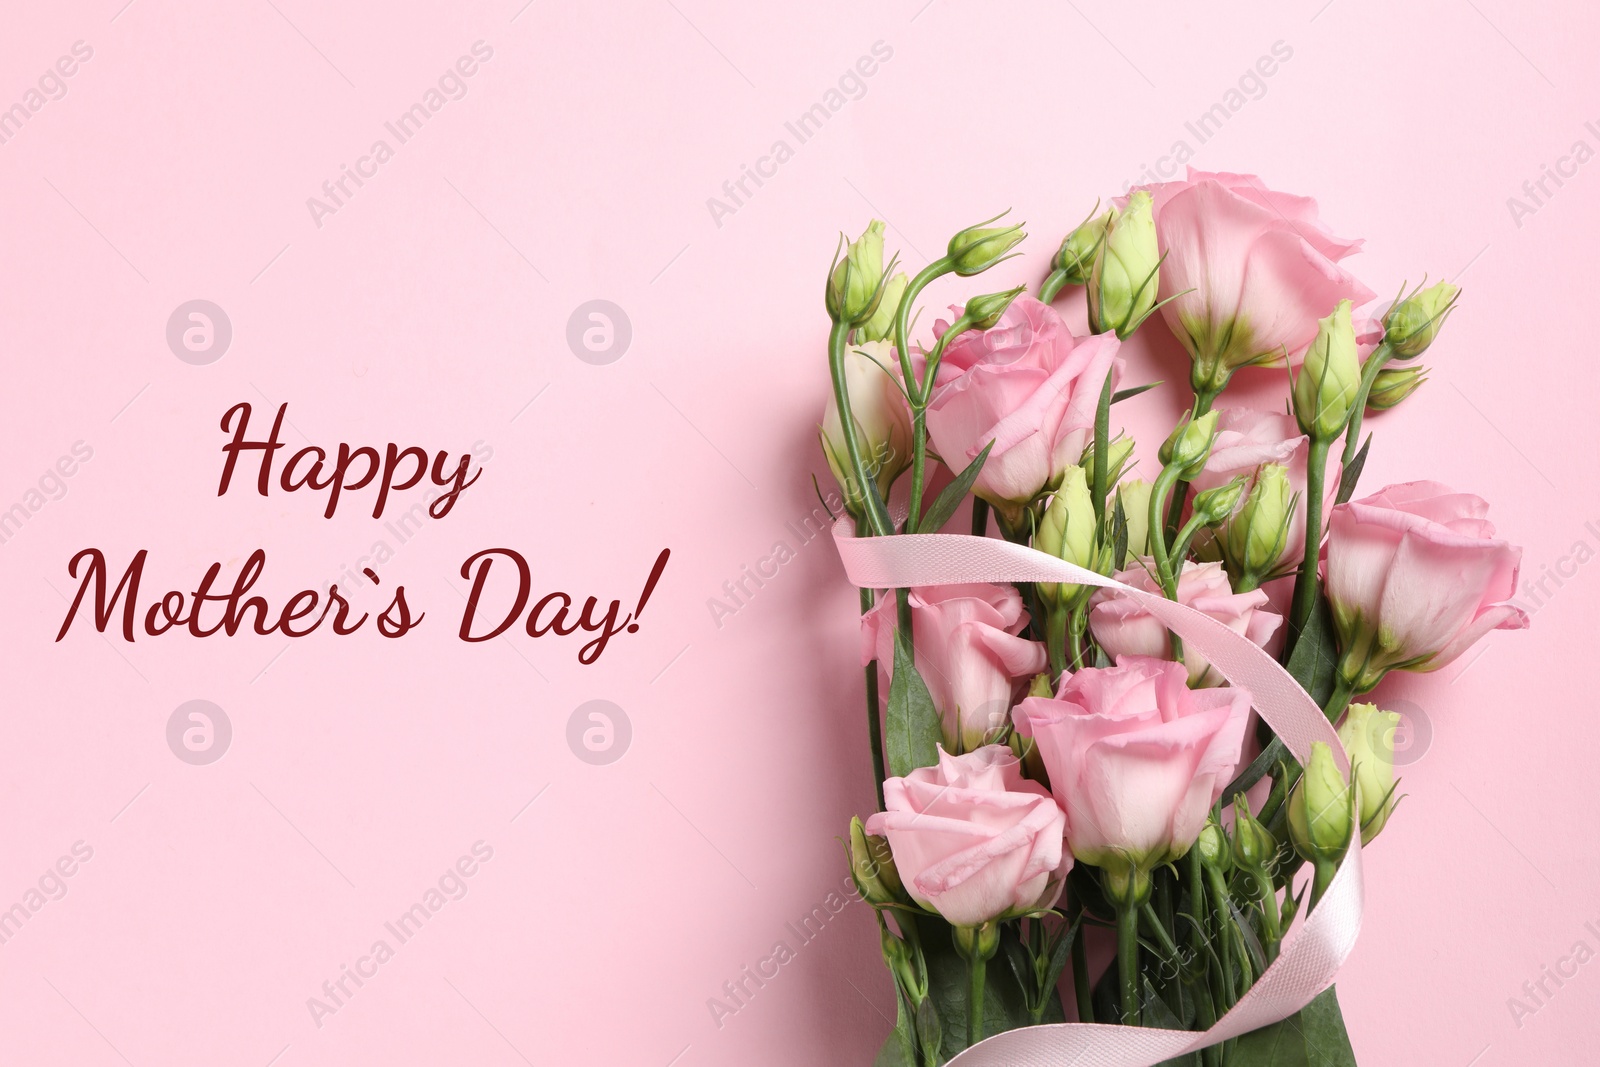 Image of Happy Mother's Day greeting card. Bouquet of beautiful flowers on pink background